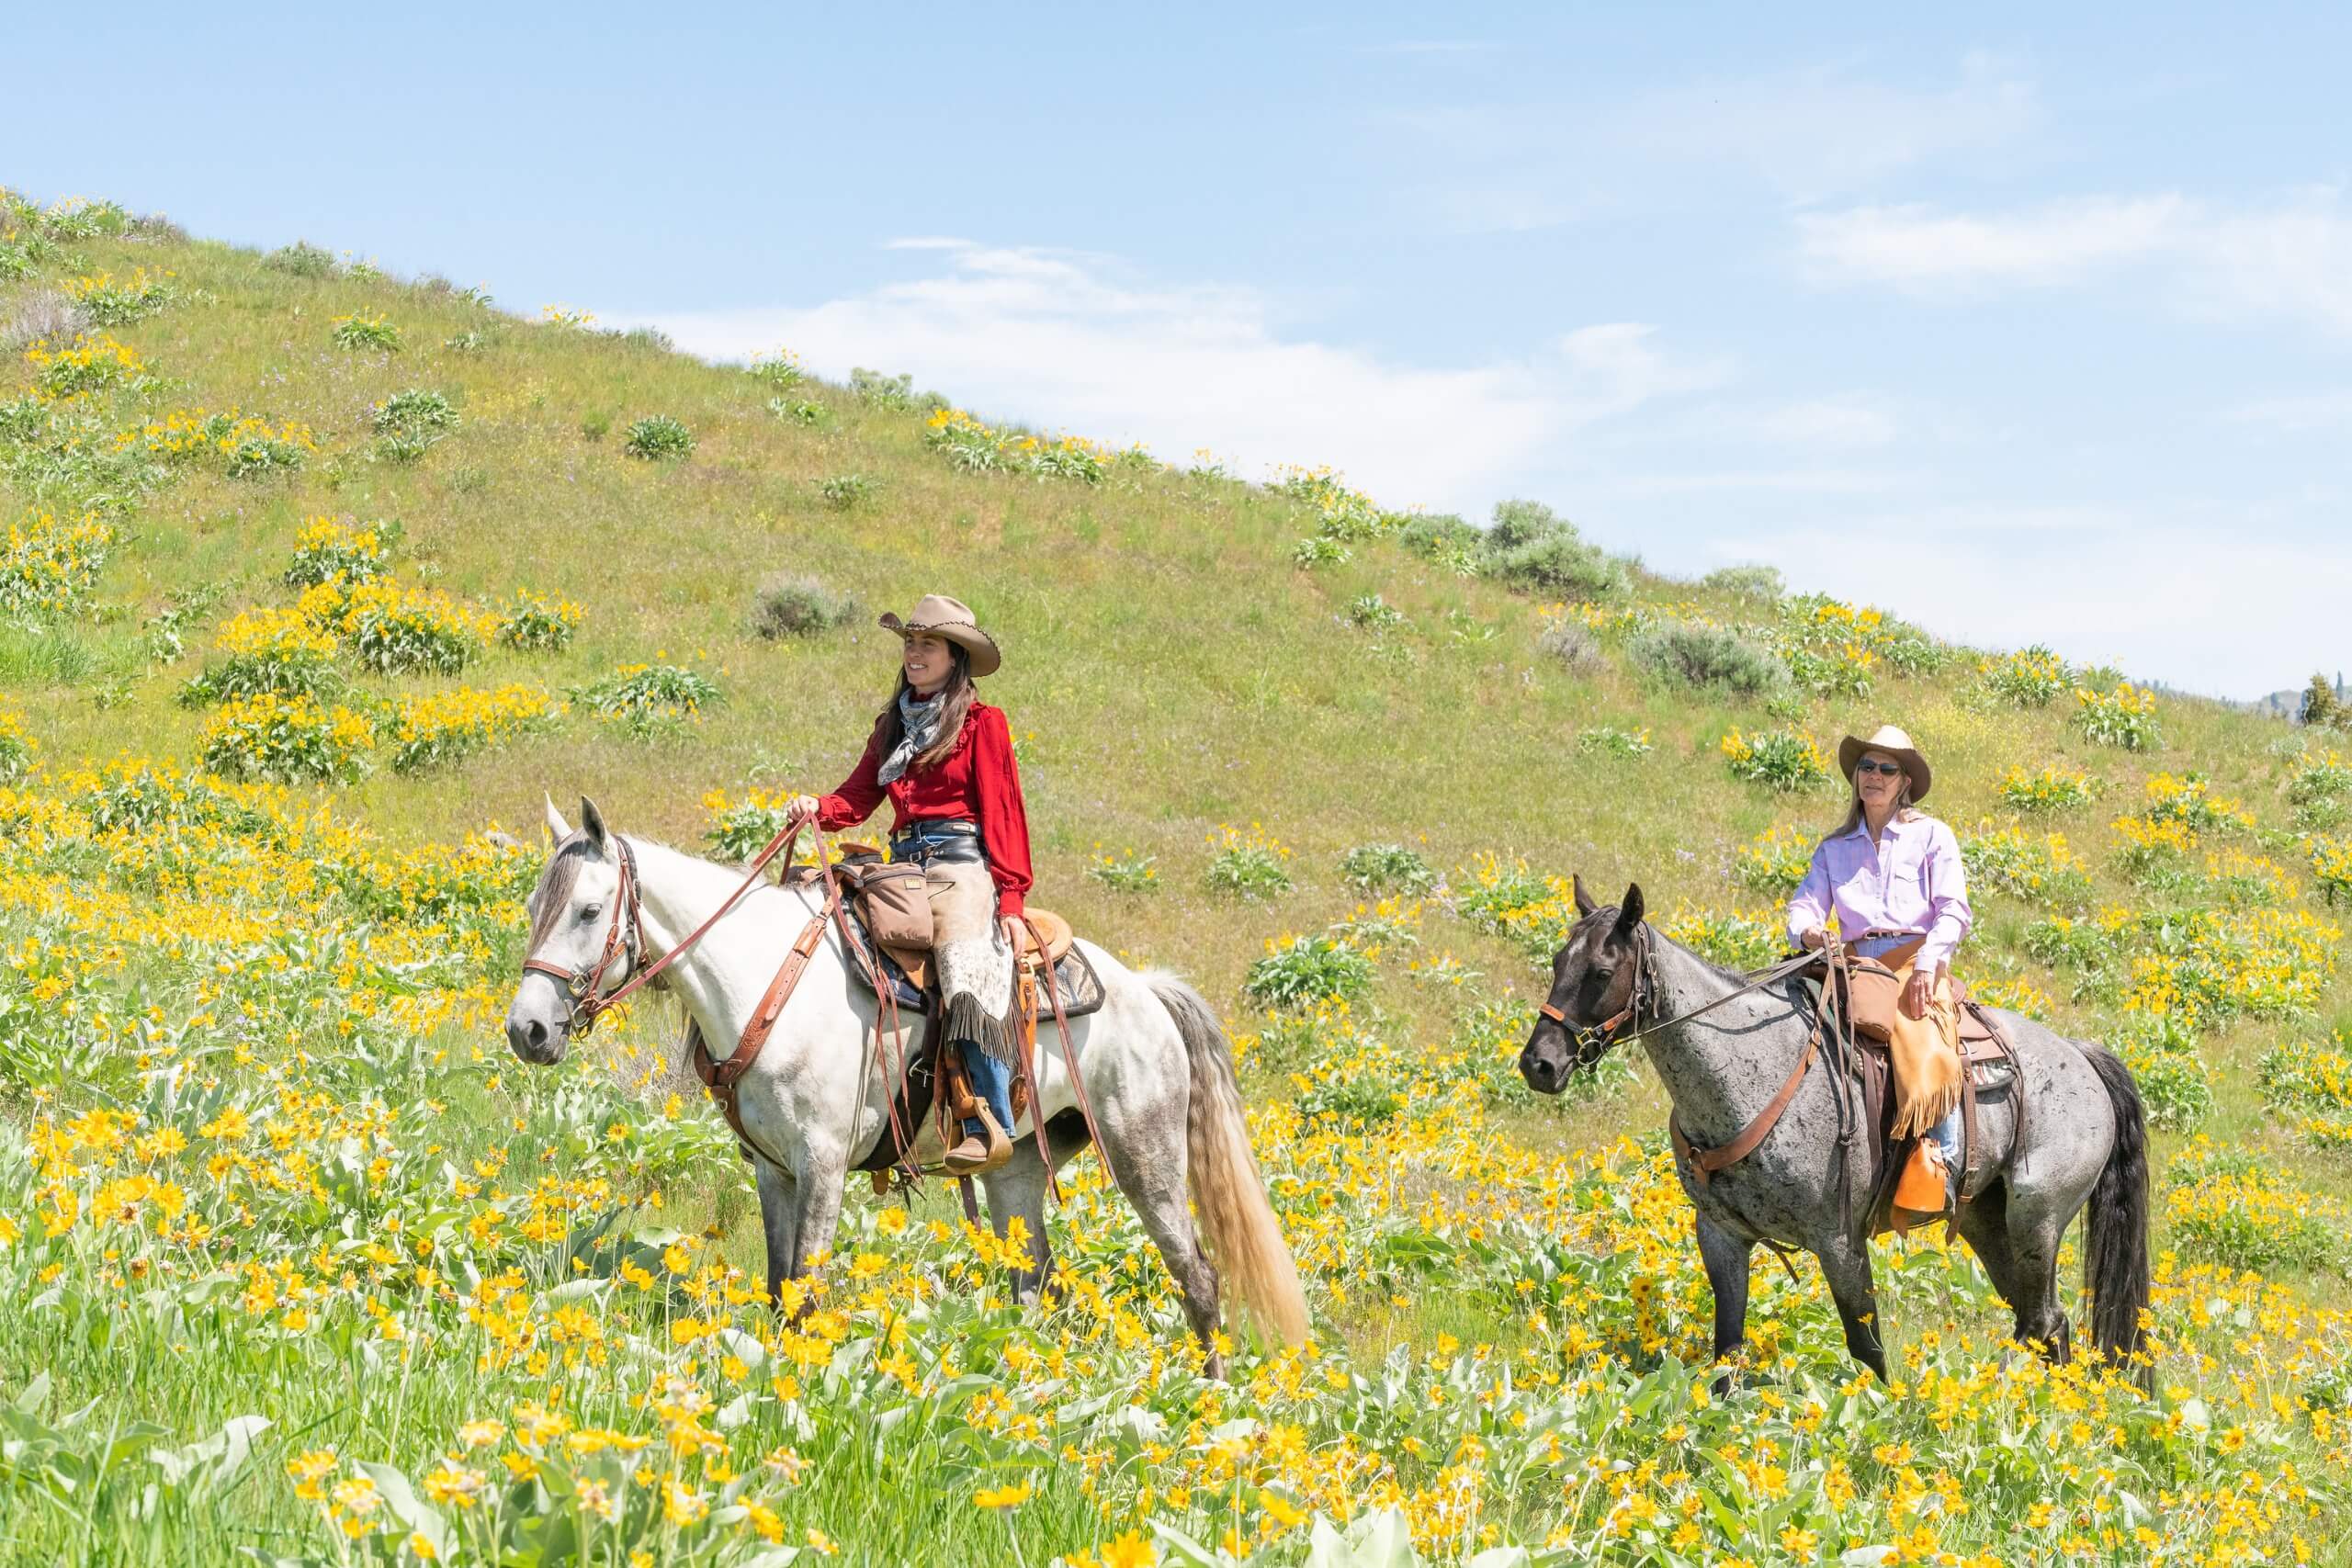 Wrangler and guest on a cross country horseback ride through yellow flowers and a mountain background.